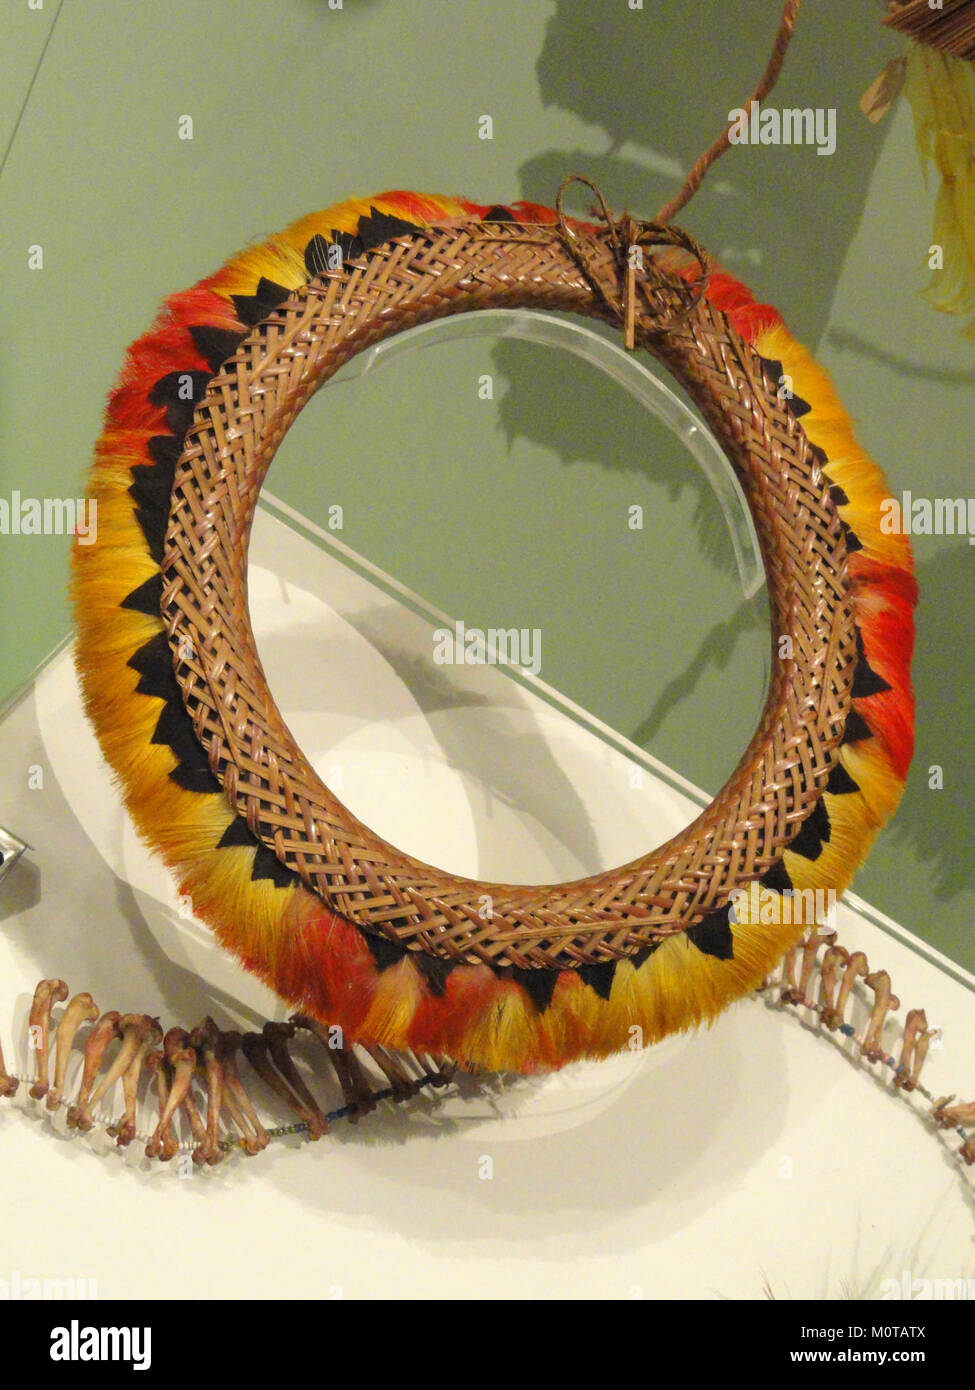 Ceremonial headdress with twined basketry band, Yahua culture, Amazonian Peru, c. 1930 - Royal Ontario Museum - DSC09549 Stock Photo